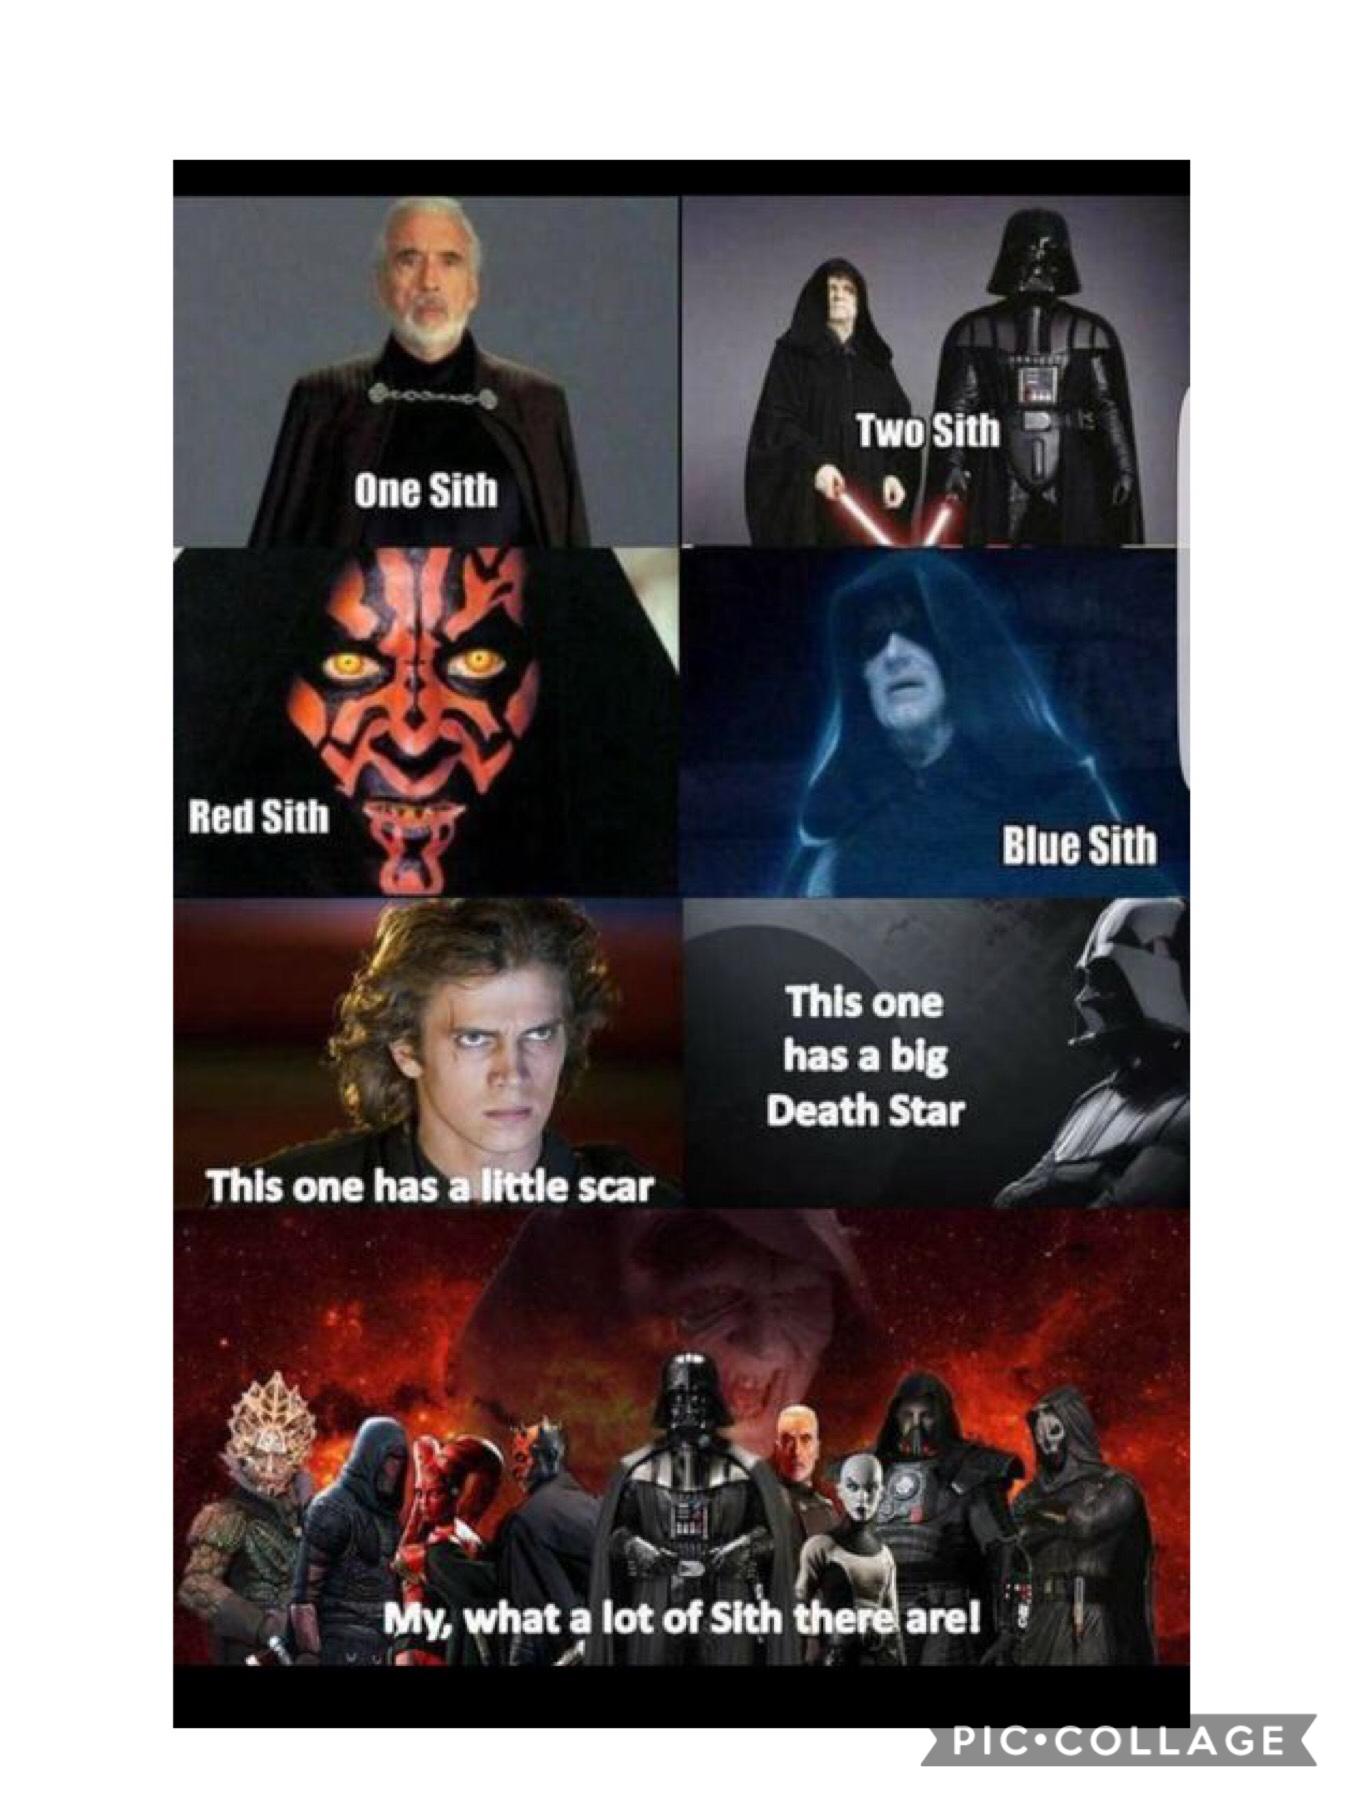 Dr. Suess and the Sith?